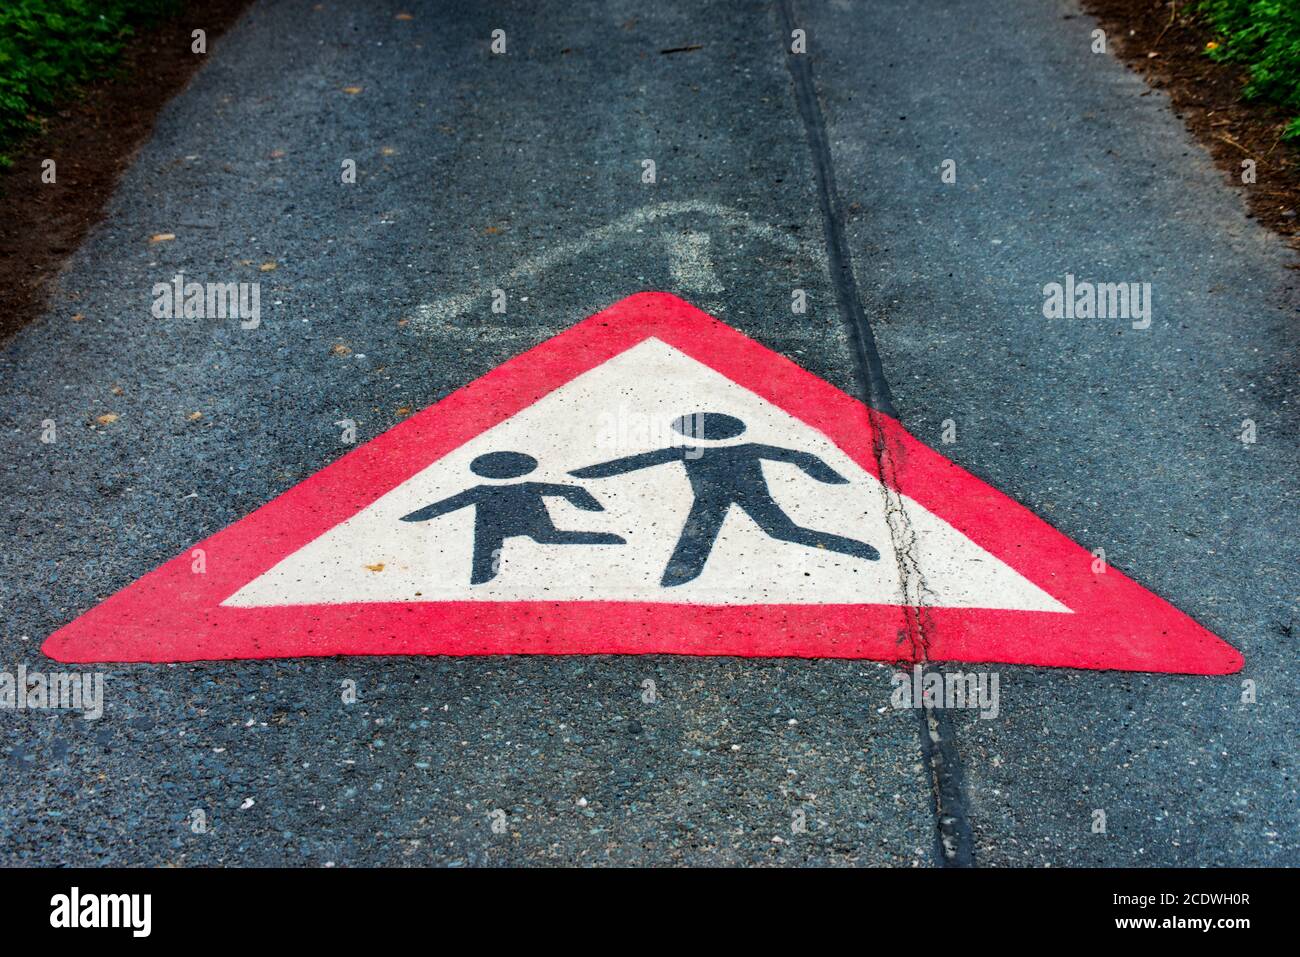 Traffic sign Attention children playing on the floor of a street Stock Photo